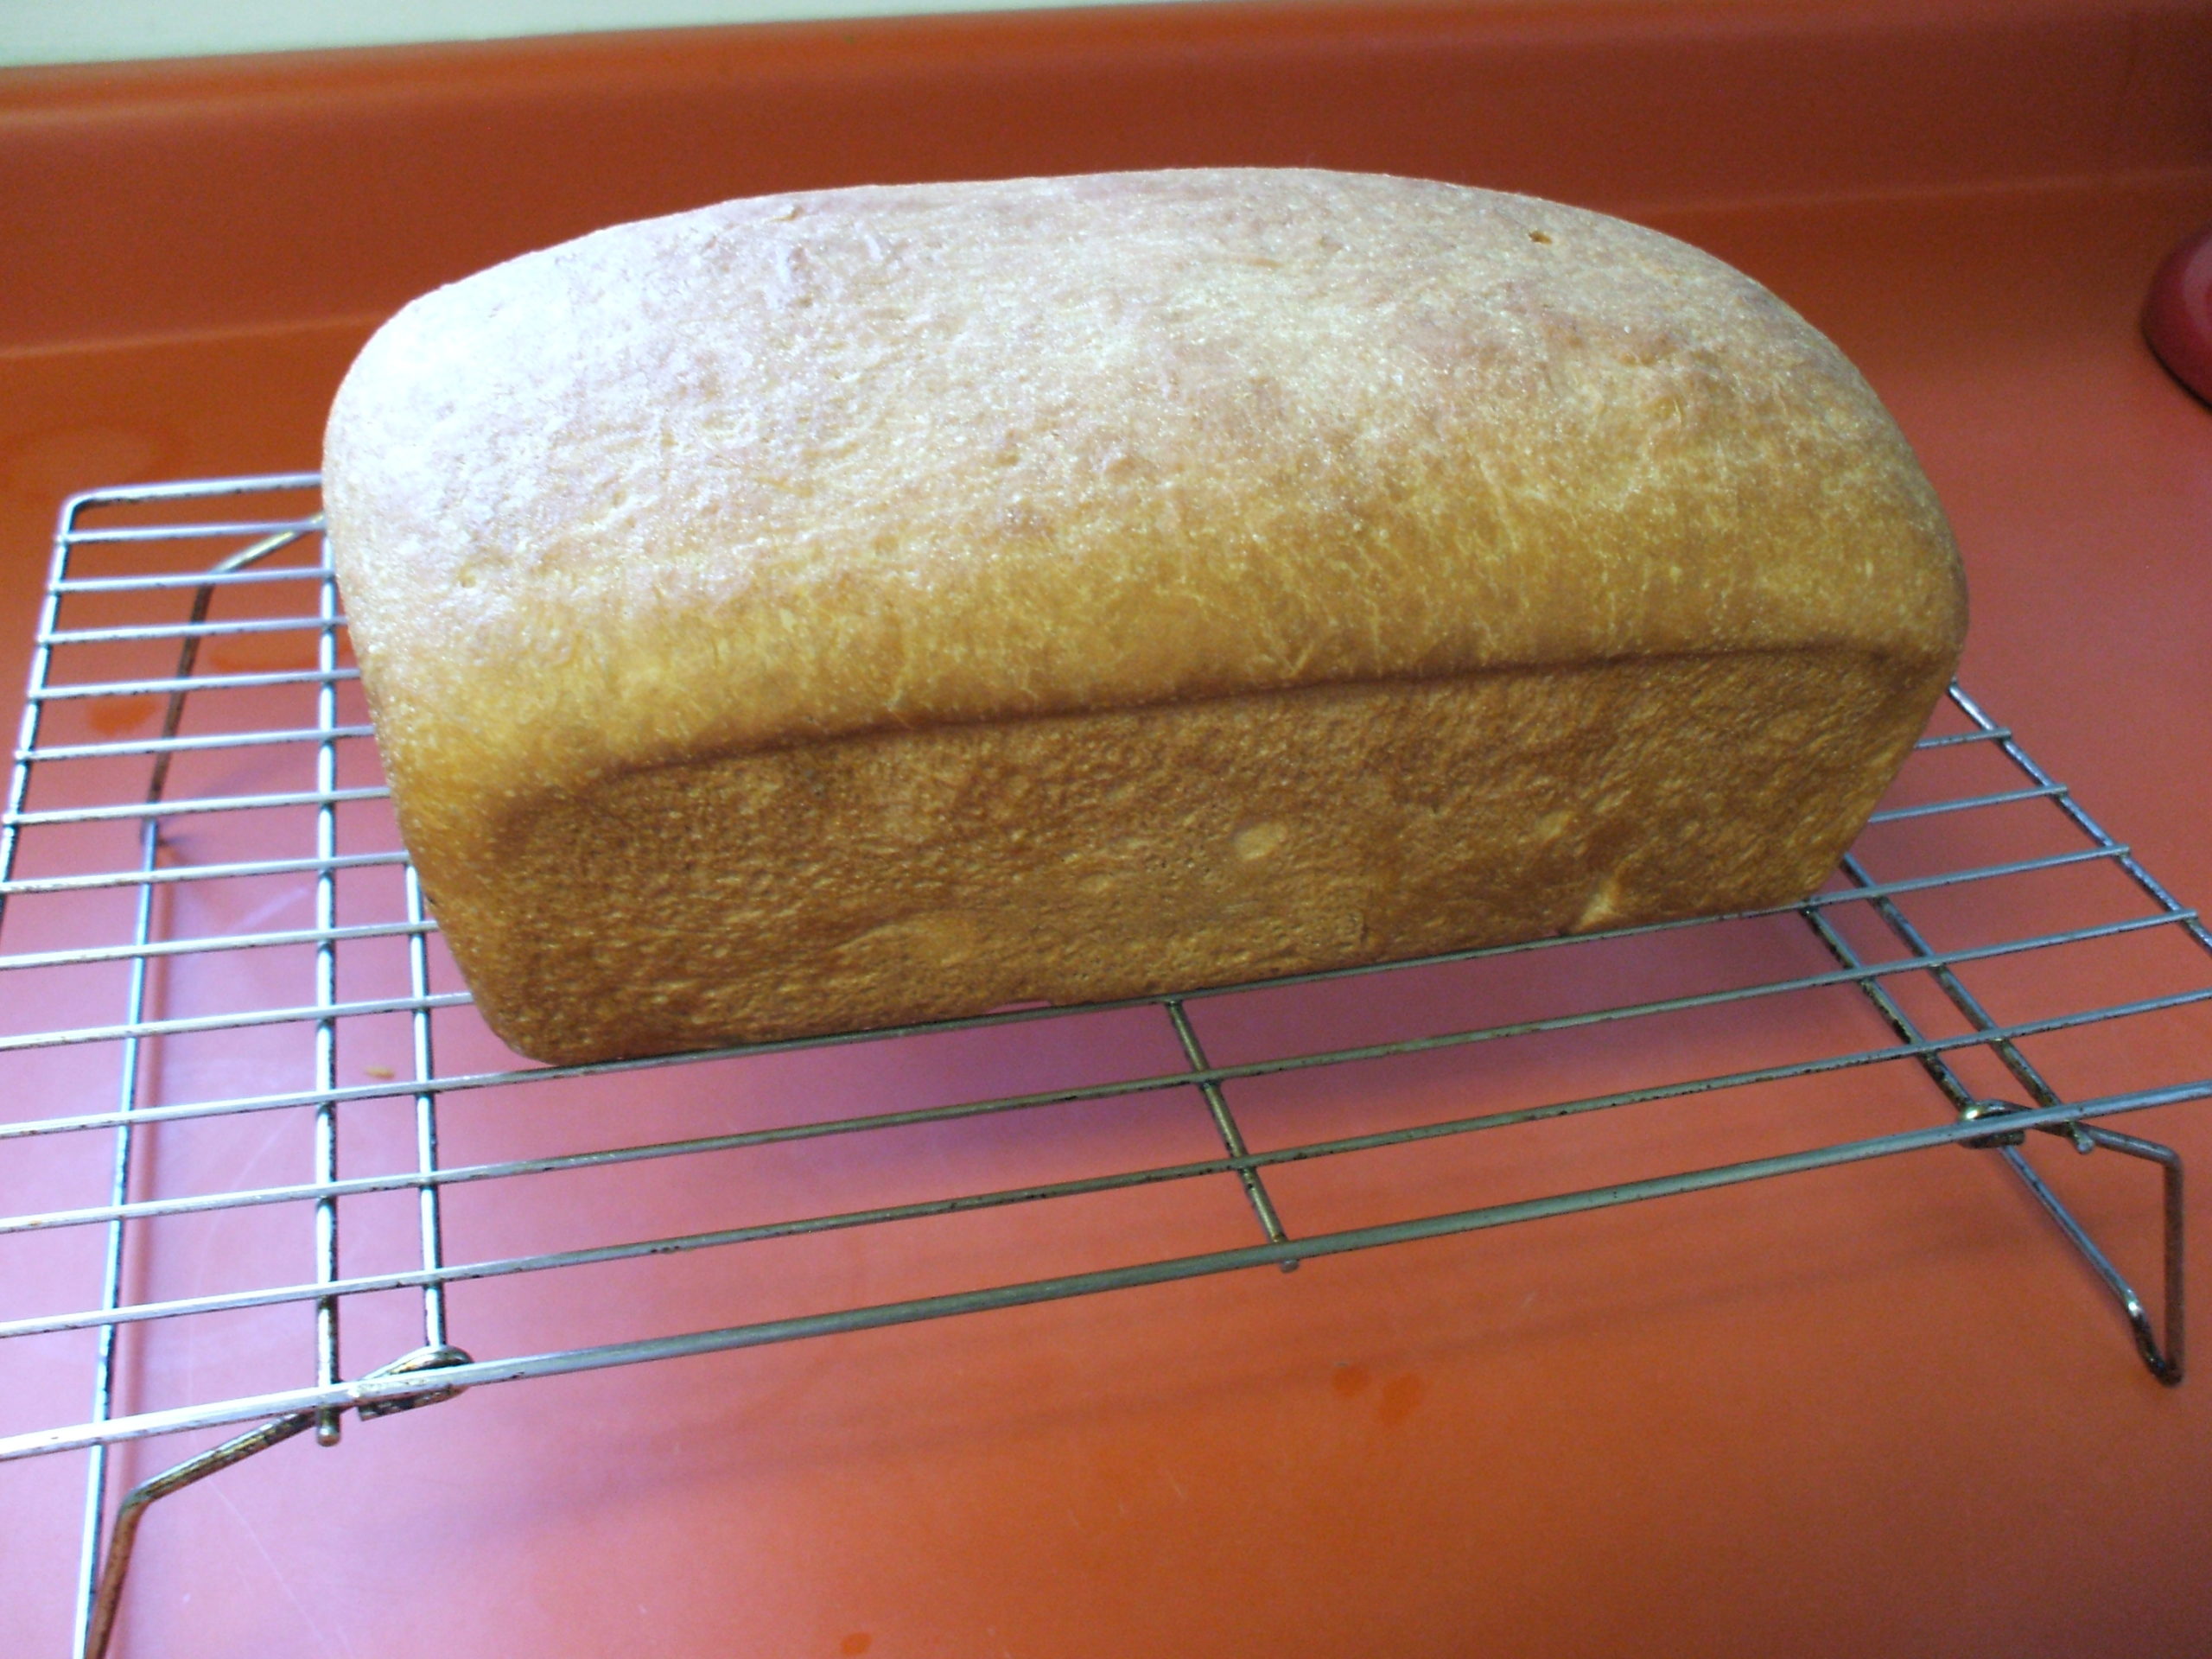 Bread Baked from Scratch